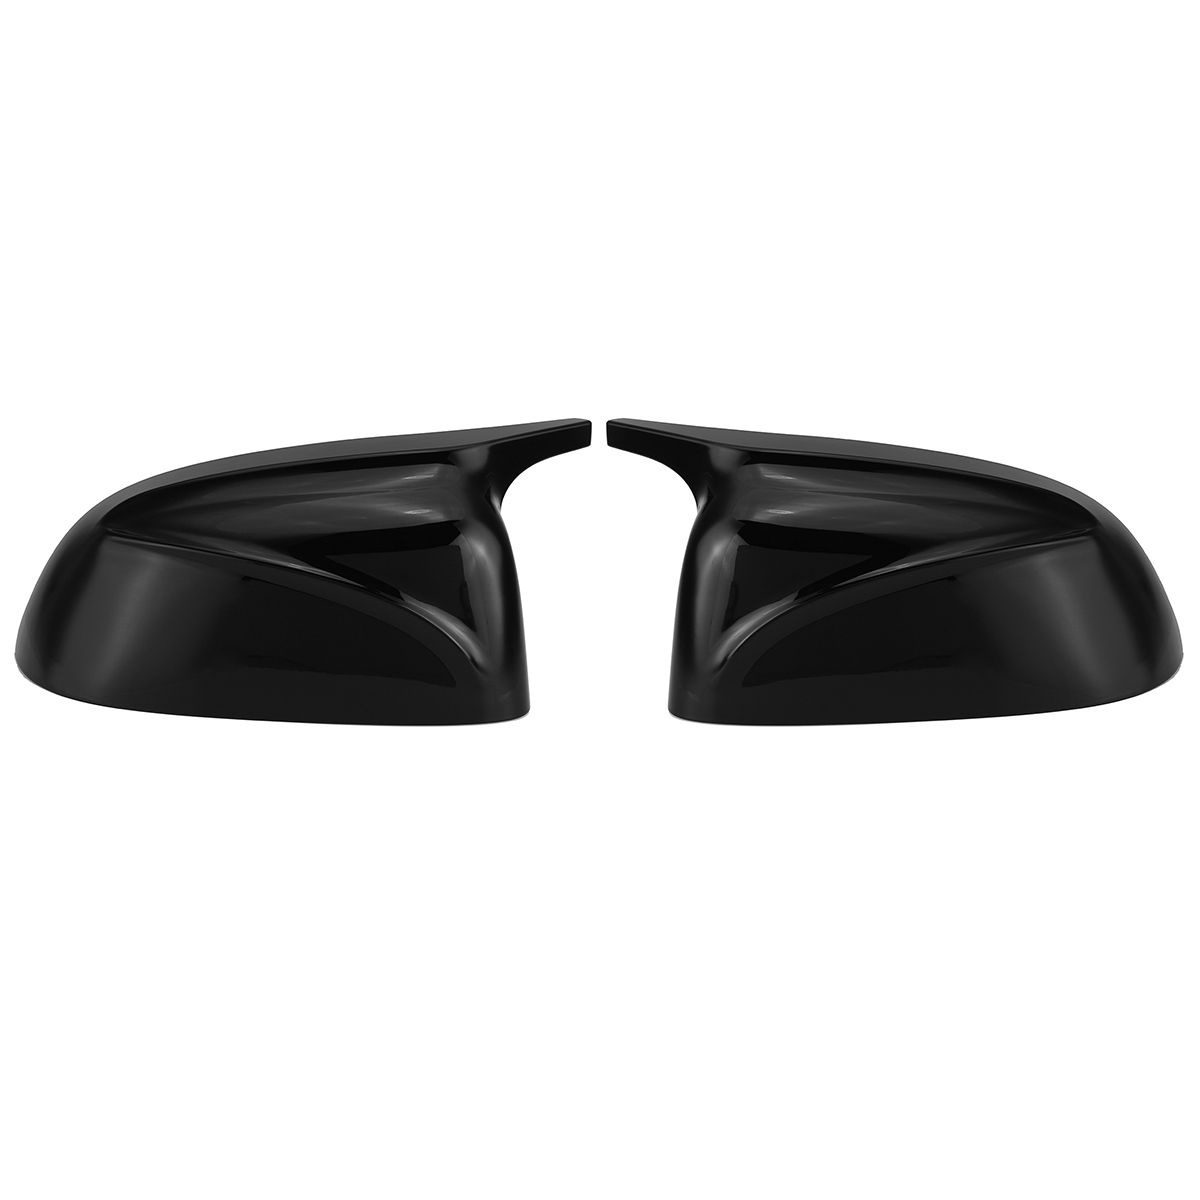 M-Style-Glossy-Black-Replacement-Side-Mirror-Cover-Caps-For-BMW-X3-X4-X5-X6-X7-G01-G02-G05-G06-G07-2-1754888